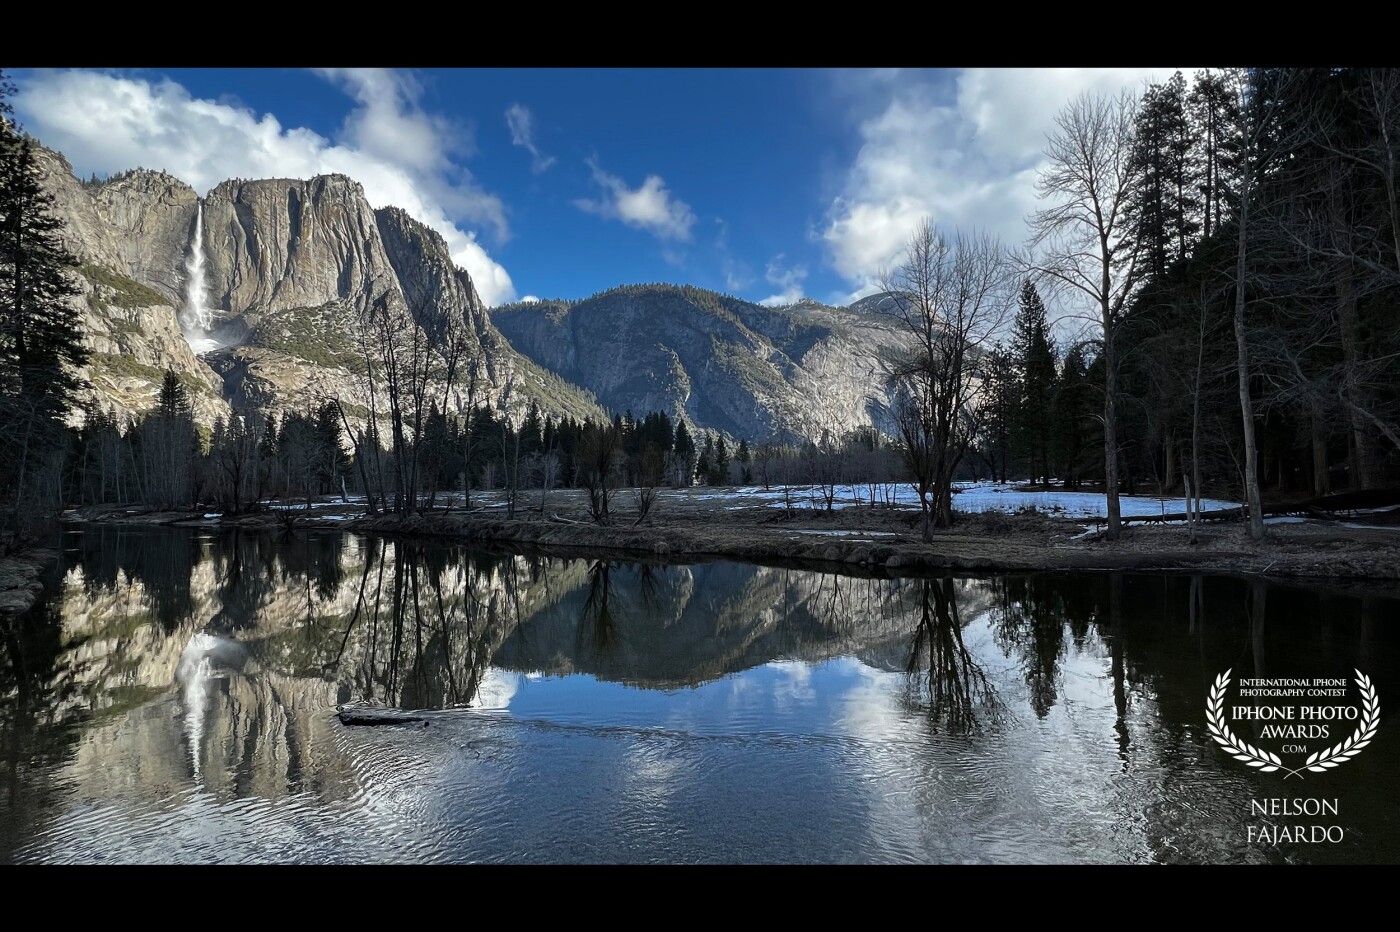 Reflected mountains in a quiet Merced River  with some clouds and trees to give a bit of sense of how grand the mountains really are.